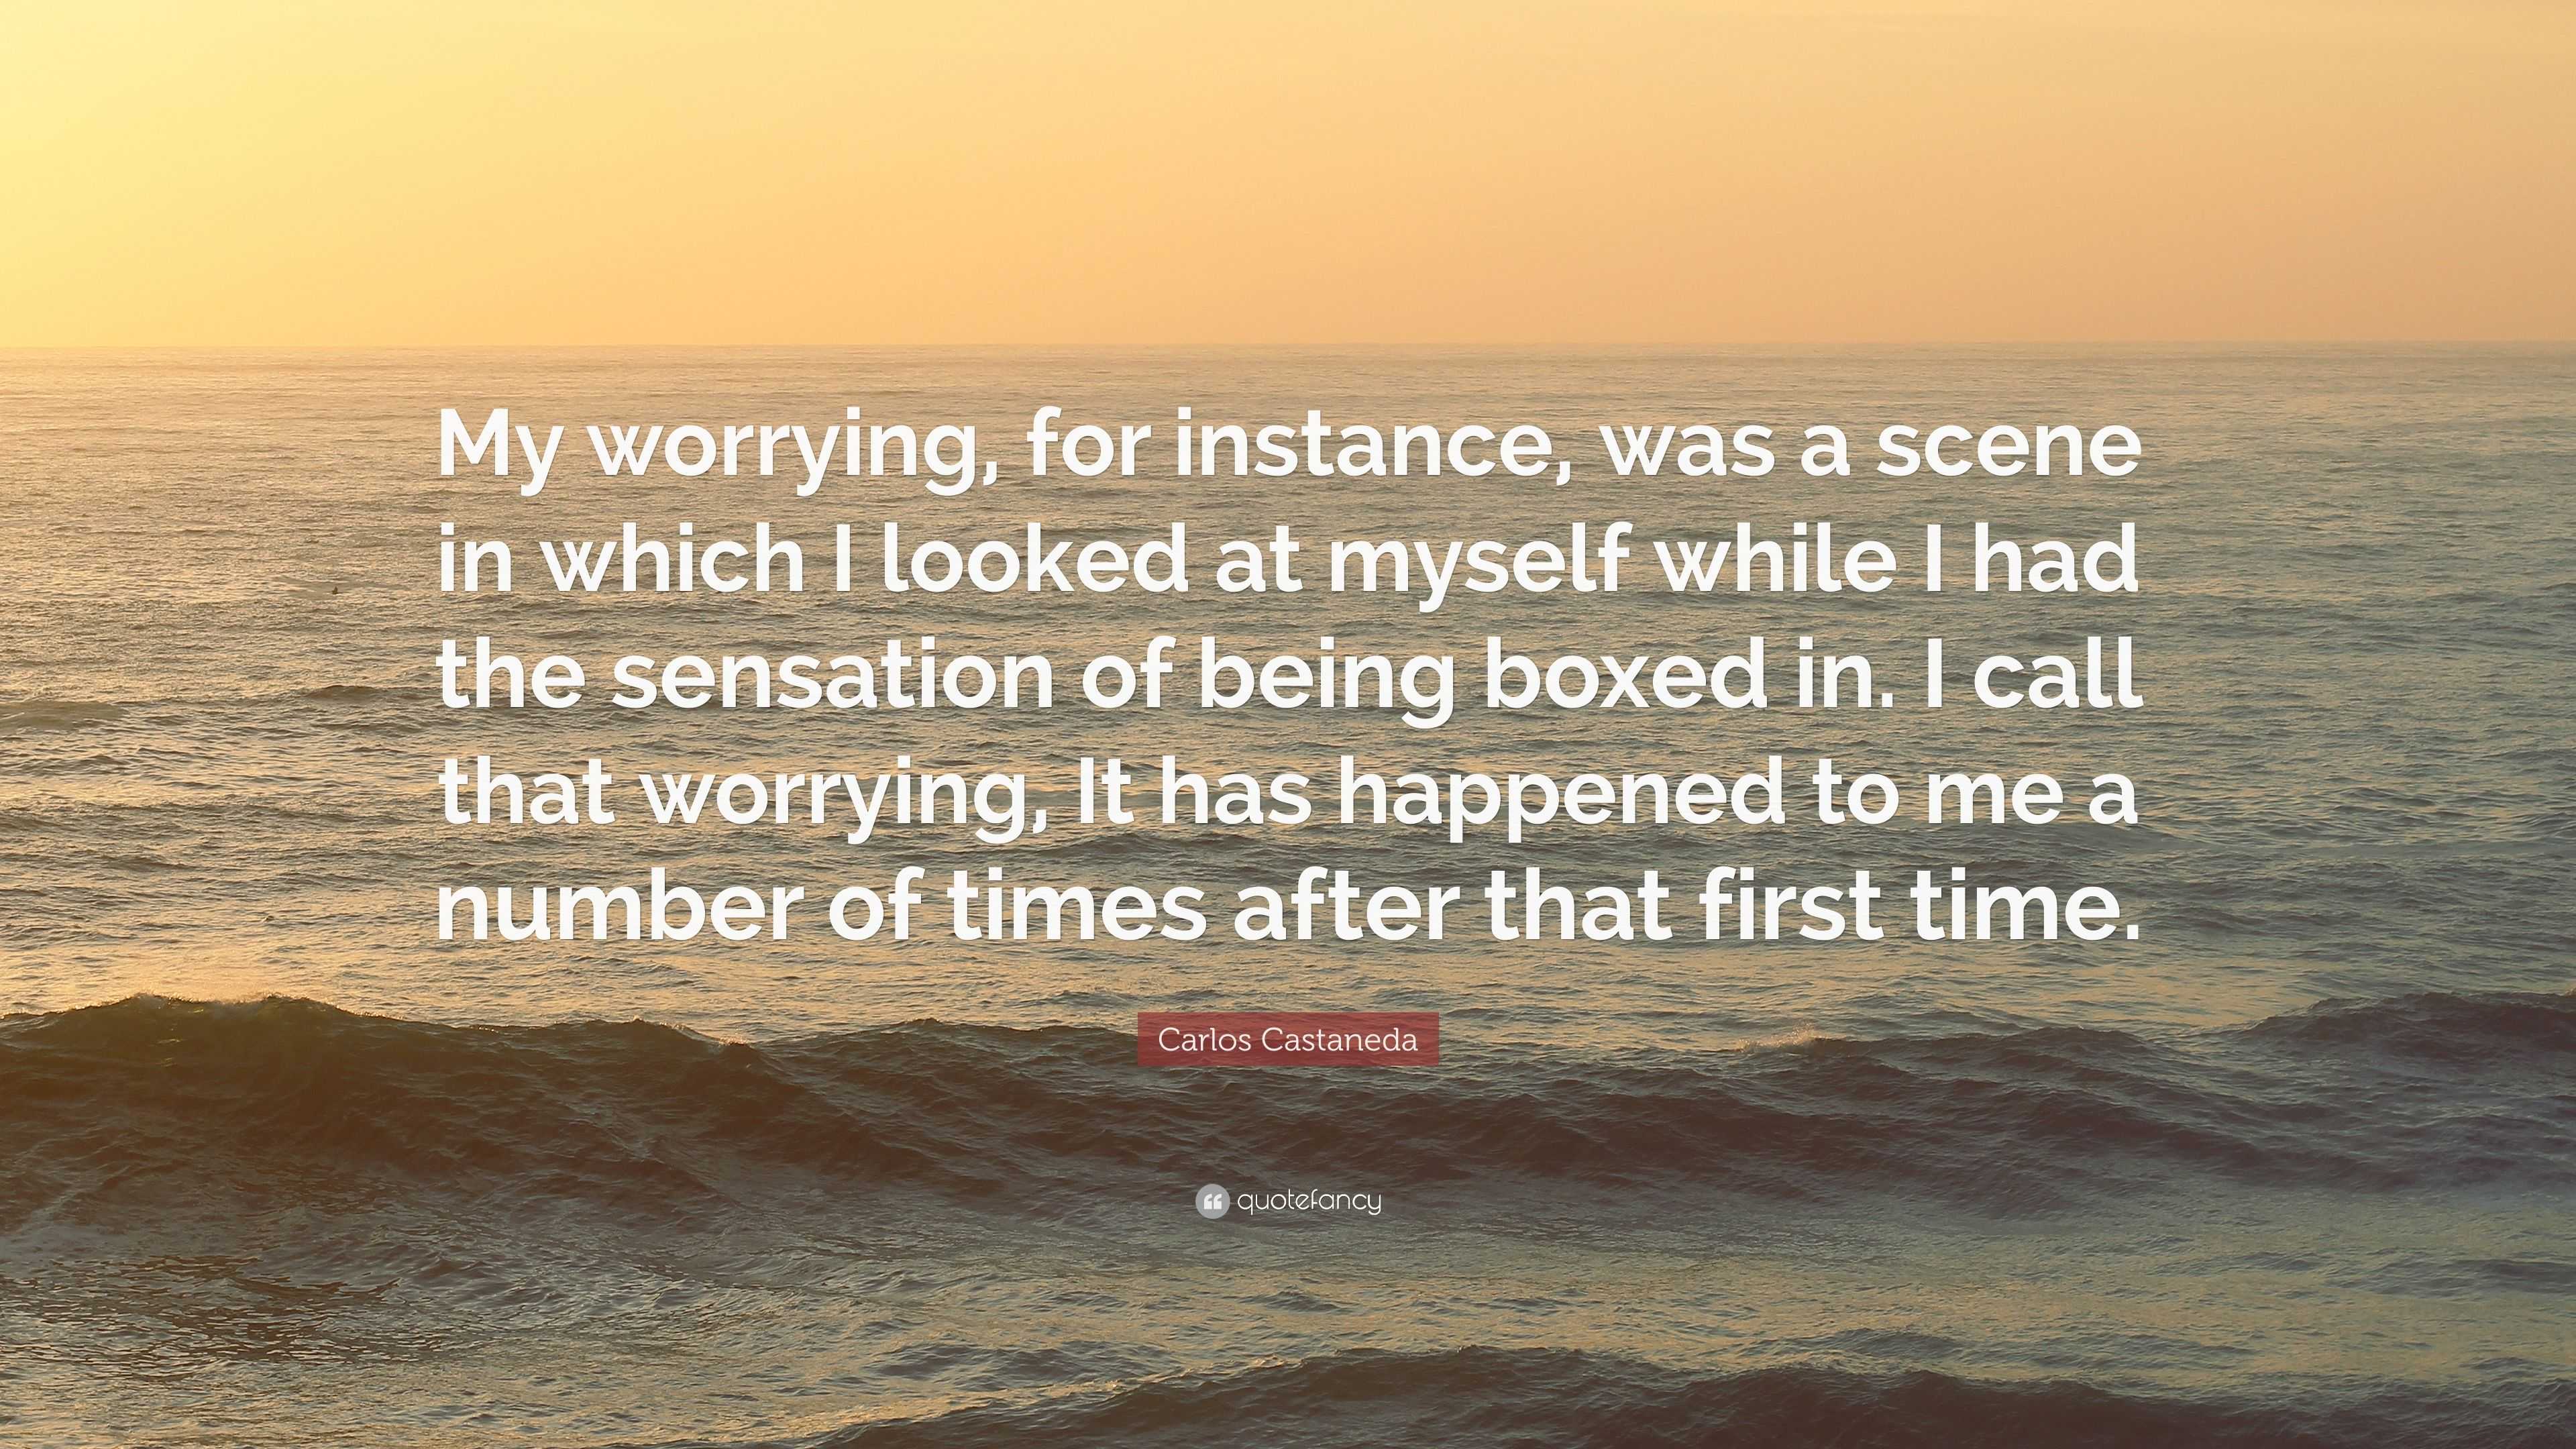 Carlos Castaneda Quote: “My worrying, for instance, was a scene in ...